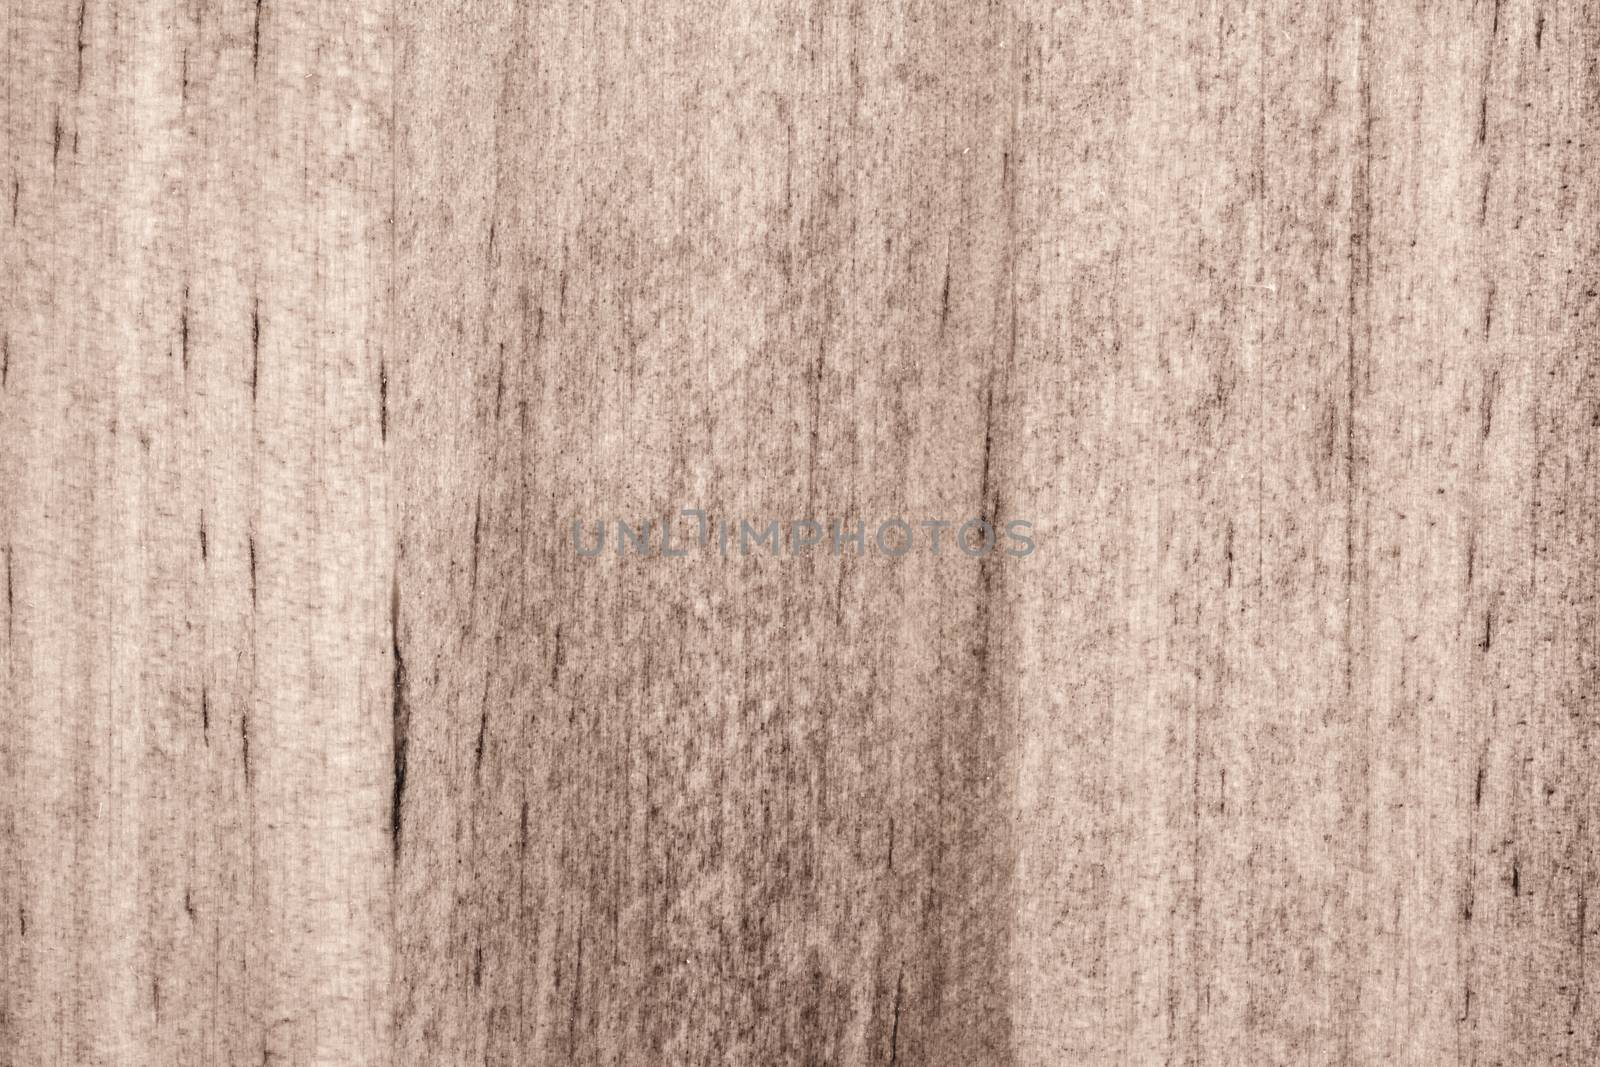 Aged wooden textured background with good detail.